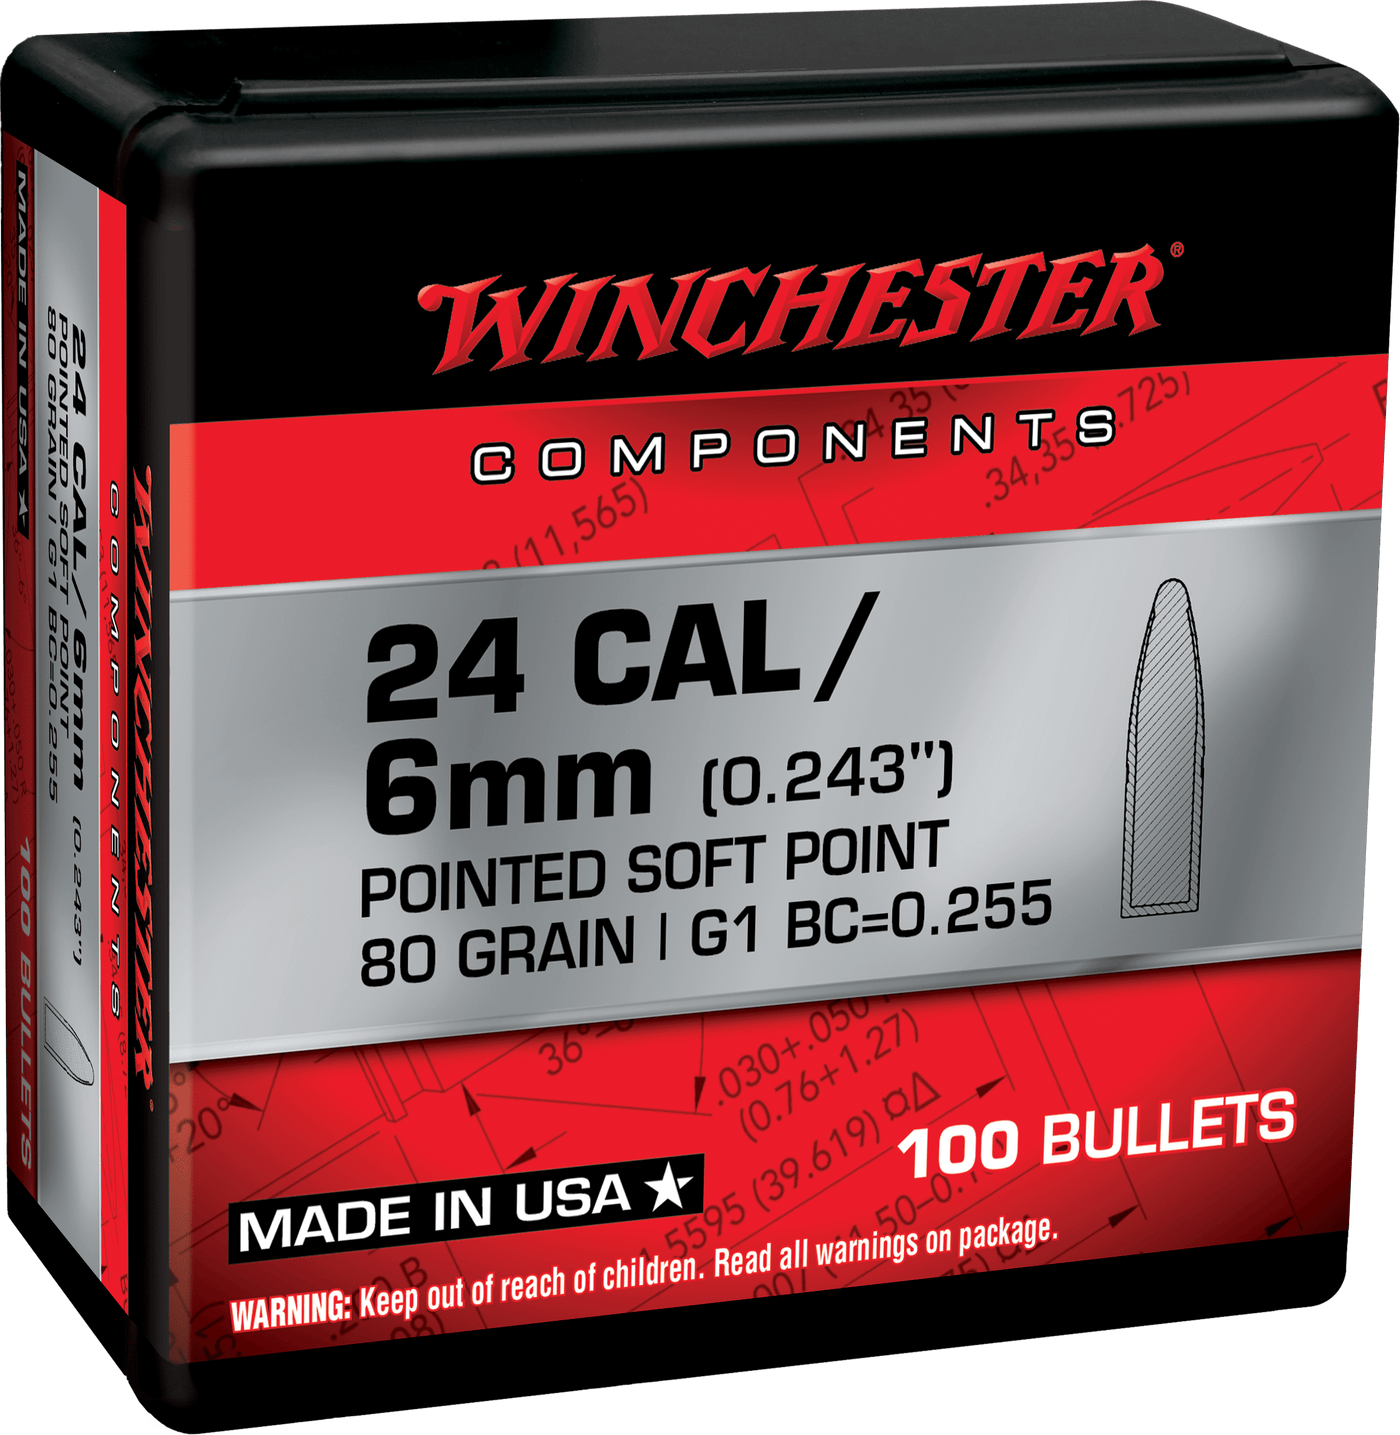 Winchester Ammo Winchester Ammo Centerfire Rifle, Win Wb243sp80x Bul 243     80 Psp        100/10 Reloading